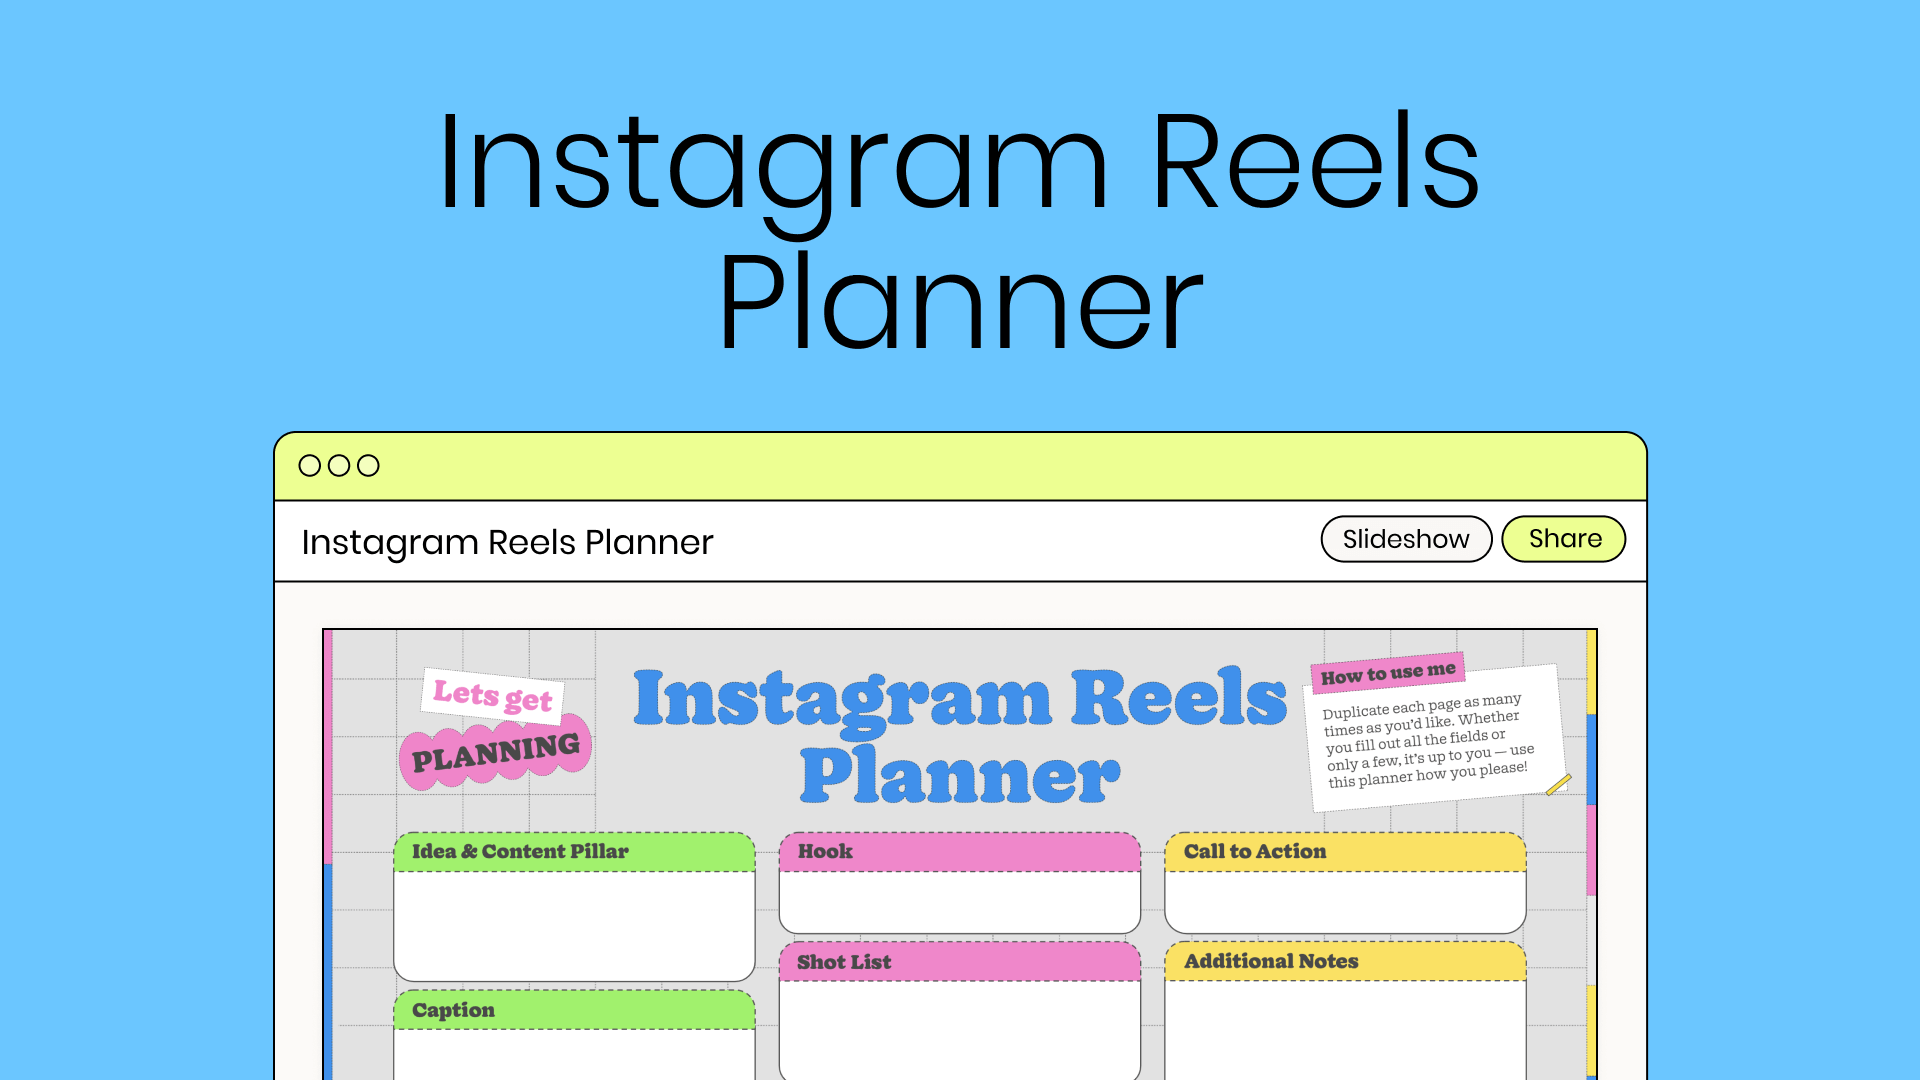 Image with Instagram Reels Planner written on blue background with graphic of Reels Planning pdf